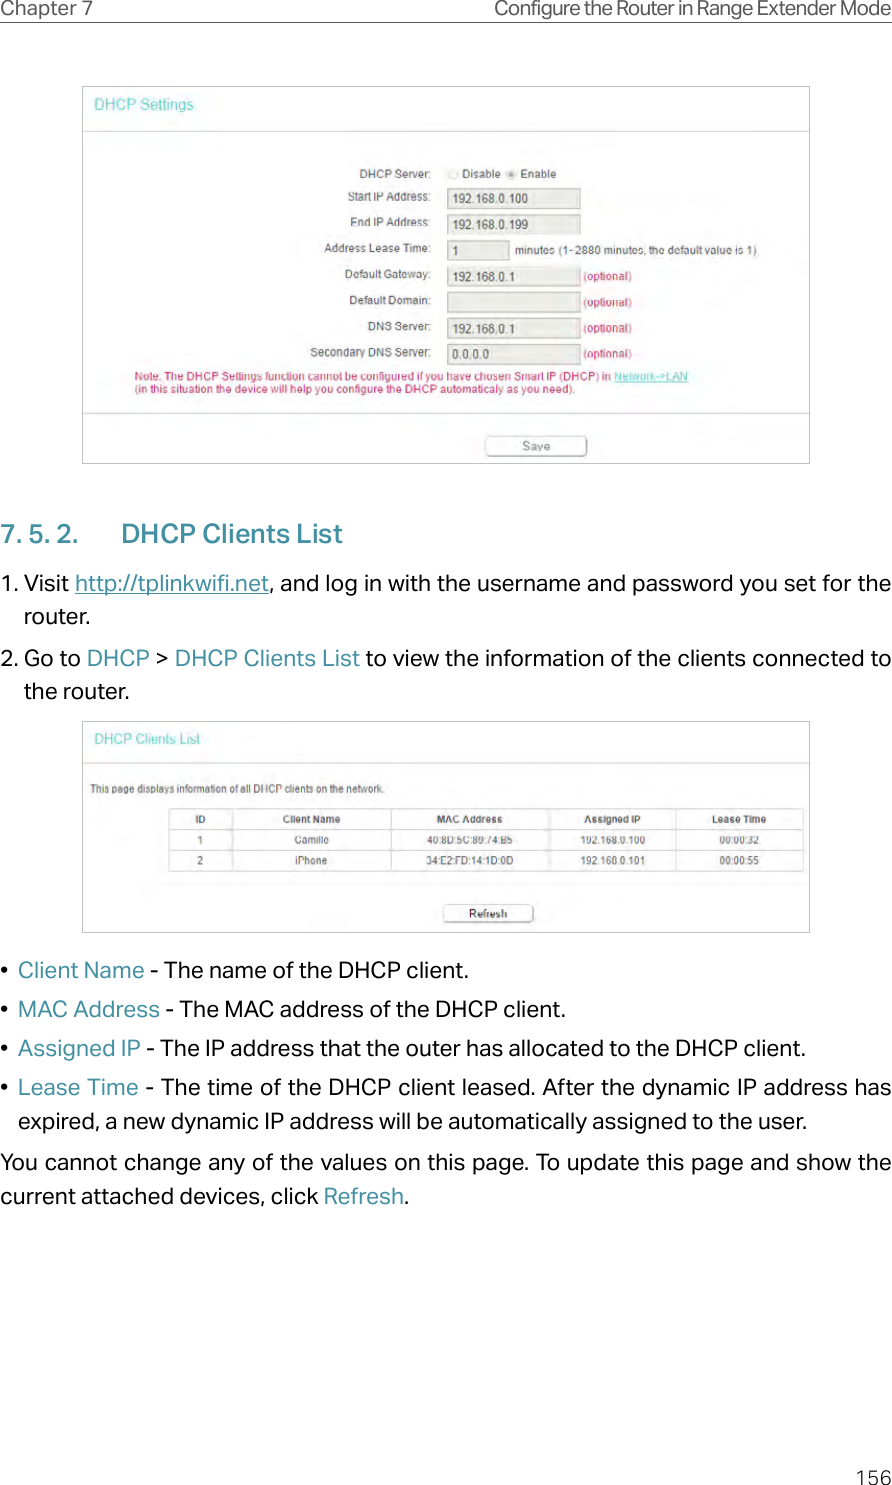 156Chapter 7 Configure the Router in Range Extender Mode7. 5. 2.  DHCP Clients List1. Visit http://tplinkwifi.net, and log in with the username and password you set for the router.2. Go to DHCP &gt; DHCP Clients List to view the information of the clients connected to the router.•  Client Name - The name of the DHCP client.•  MAC Address - The MAC address of the DHCP client. •  Assigned IP - The IP address that the outer has allocated to the DHCP client.•  Lease Time - The time of the DHCP client leased. After the dynamic IP address has expired, a new dynamic IP address will be automatically assigned to the user.  You cannot change any of the values on this page. To update this page and show the current attached devices, click Refresh.